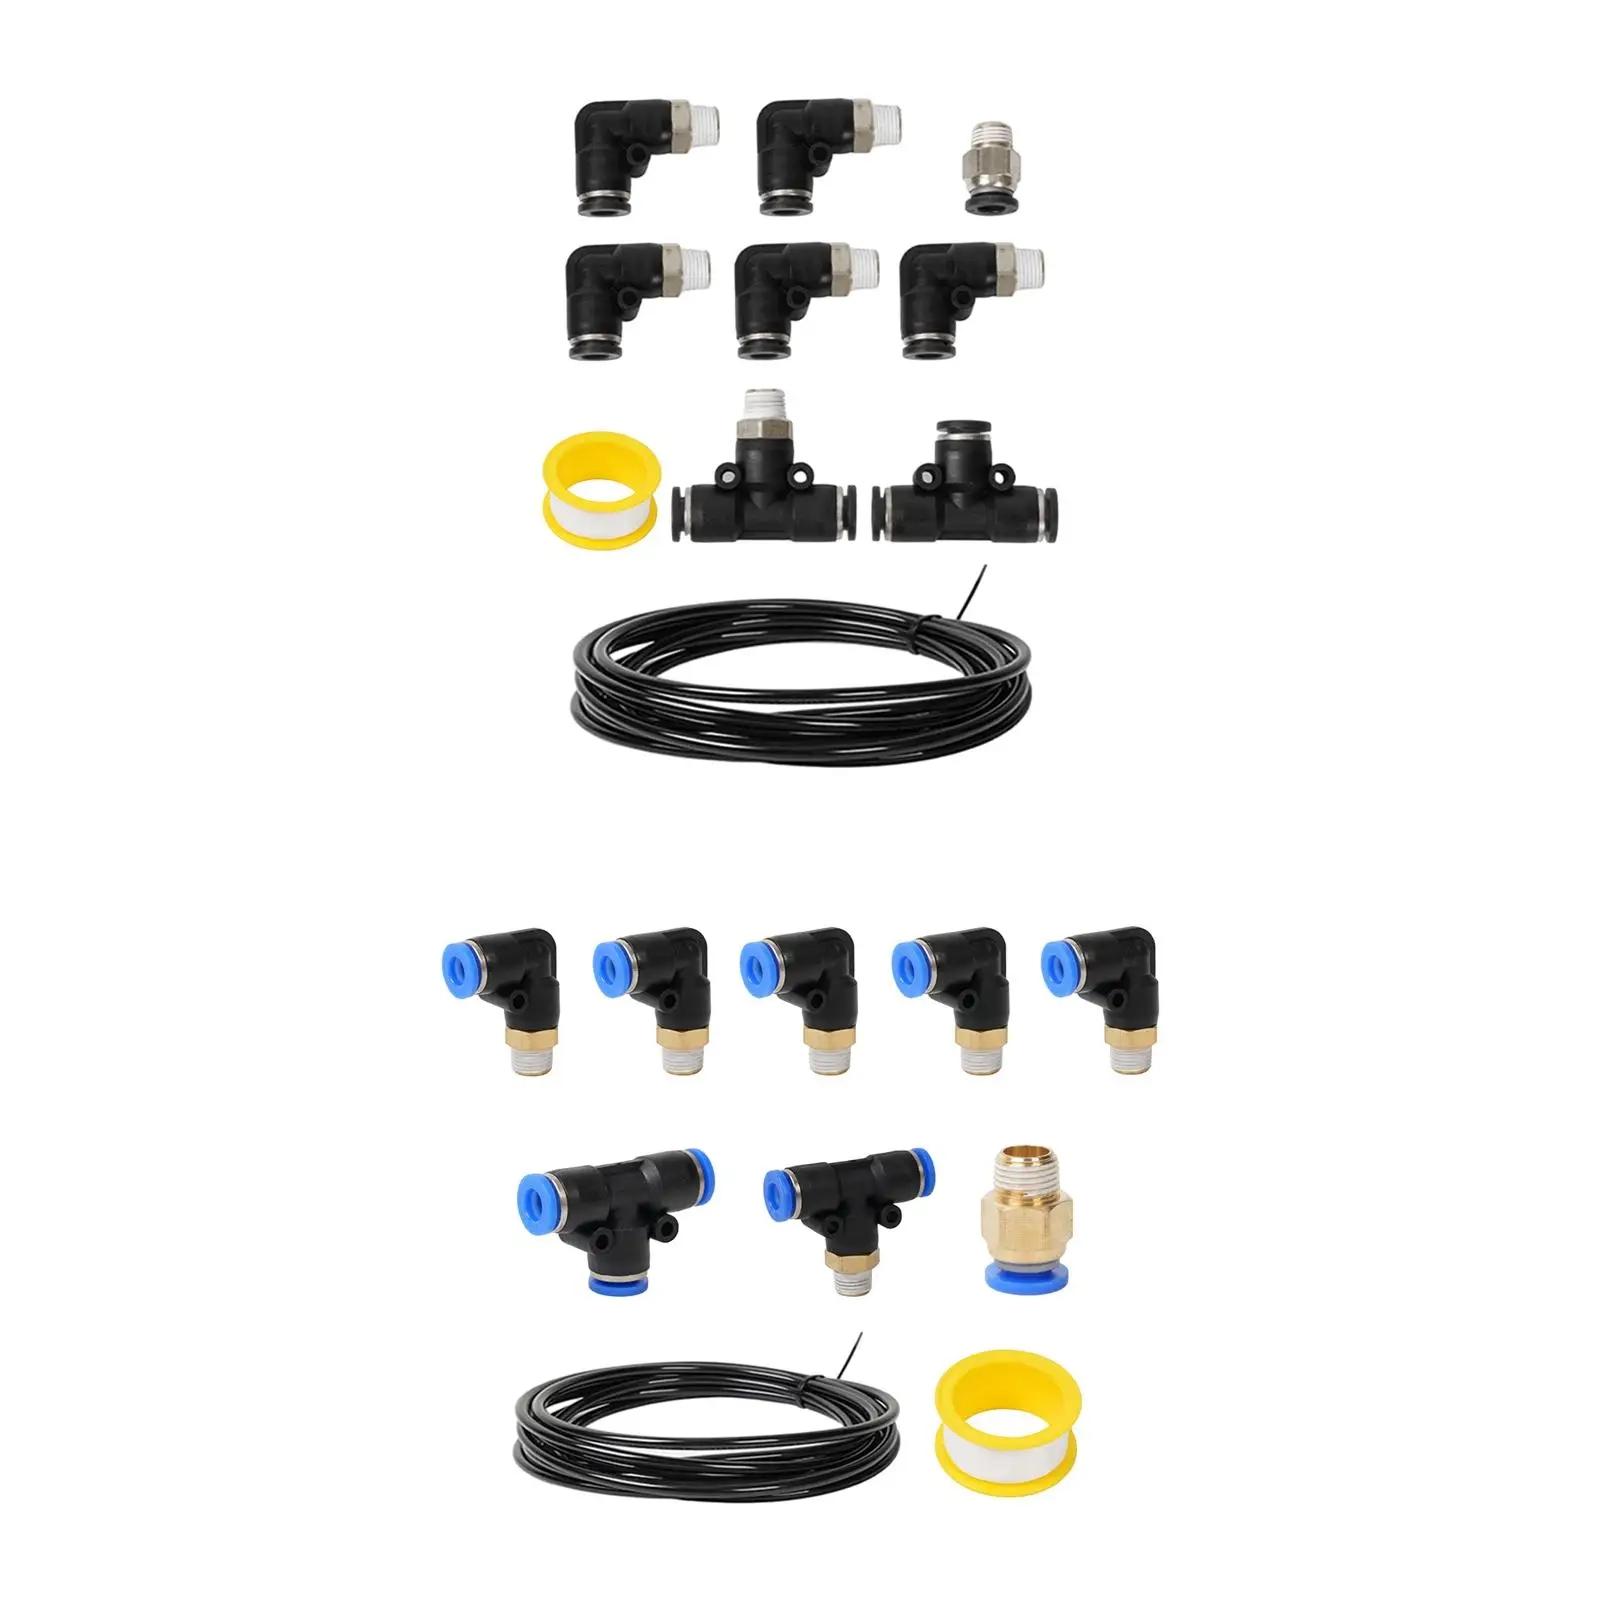 Wastegate Solenoid Connector Set Vacuum Fitting Kit for Vehicles Convenient Installation Automotive Accessories Durable Stable